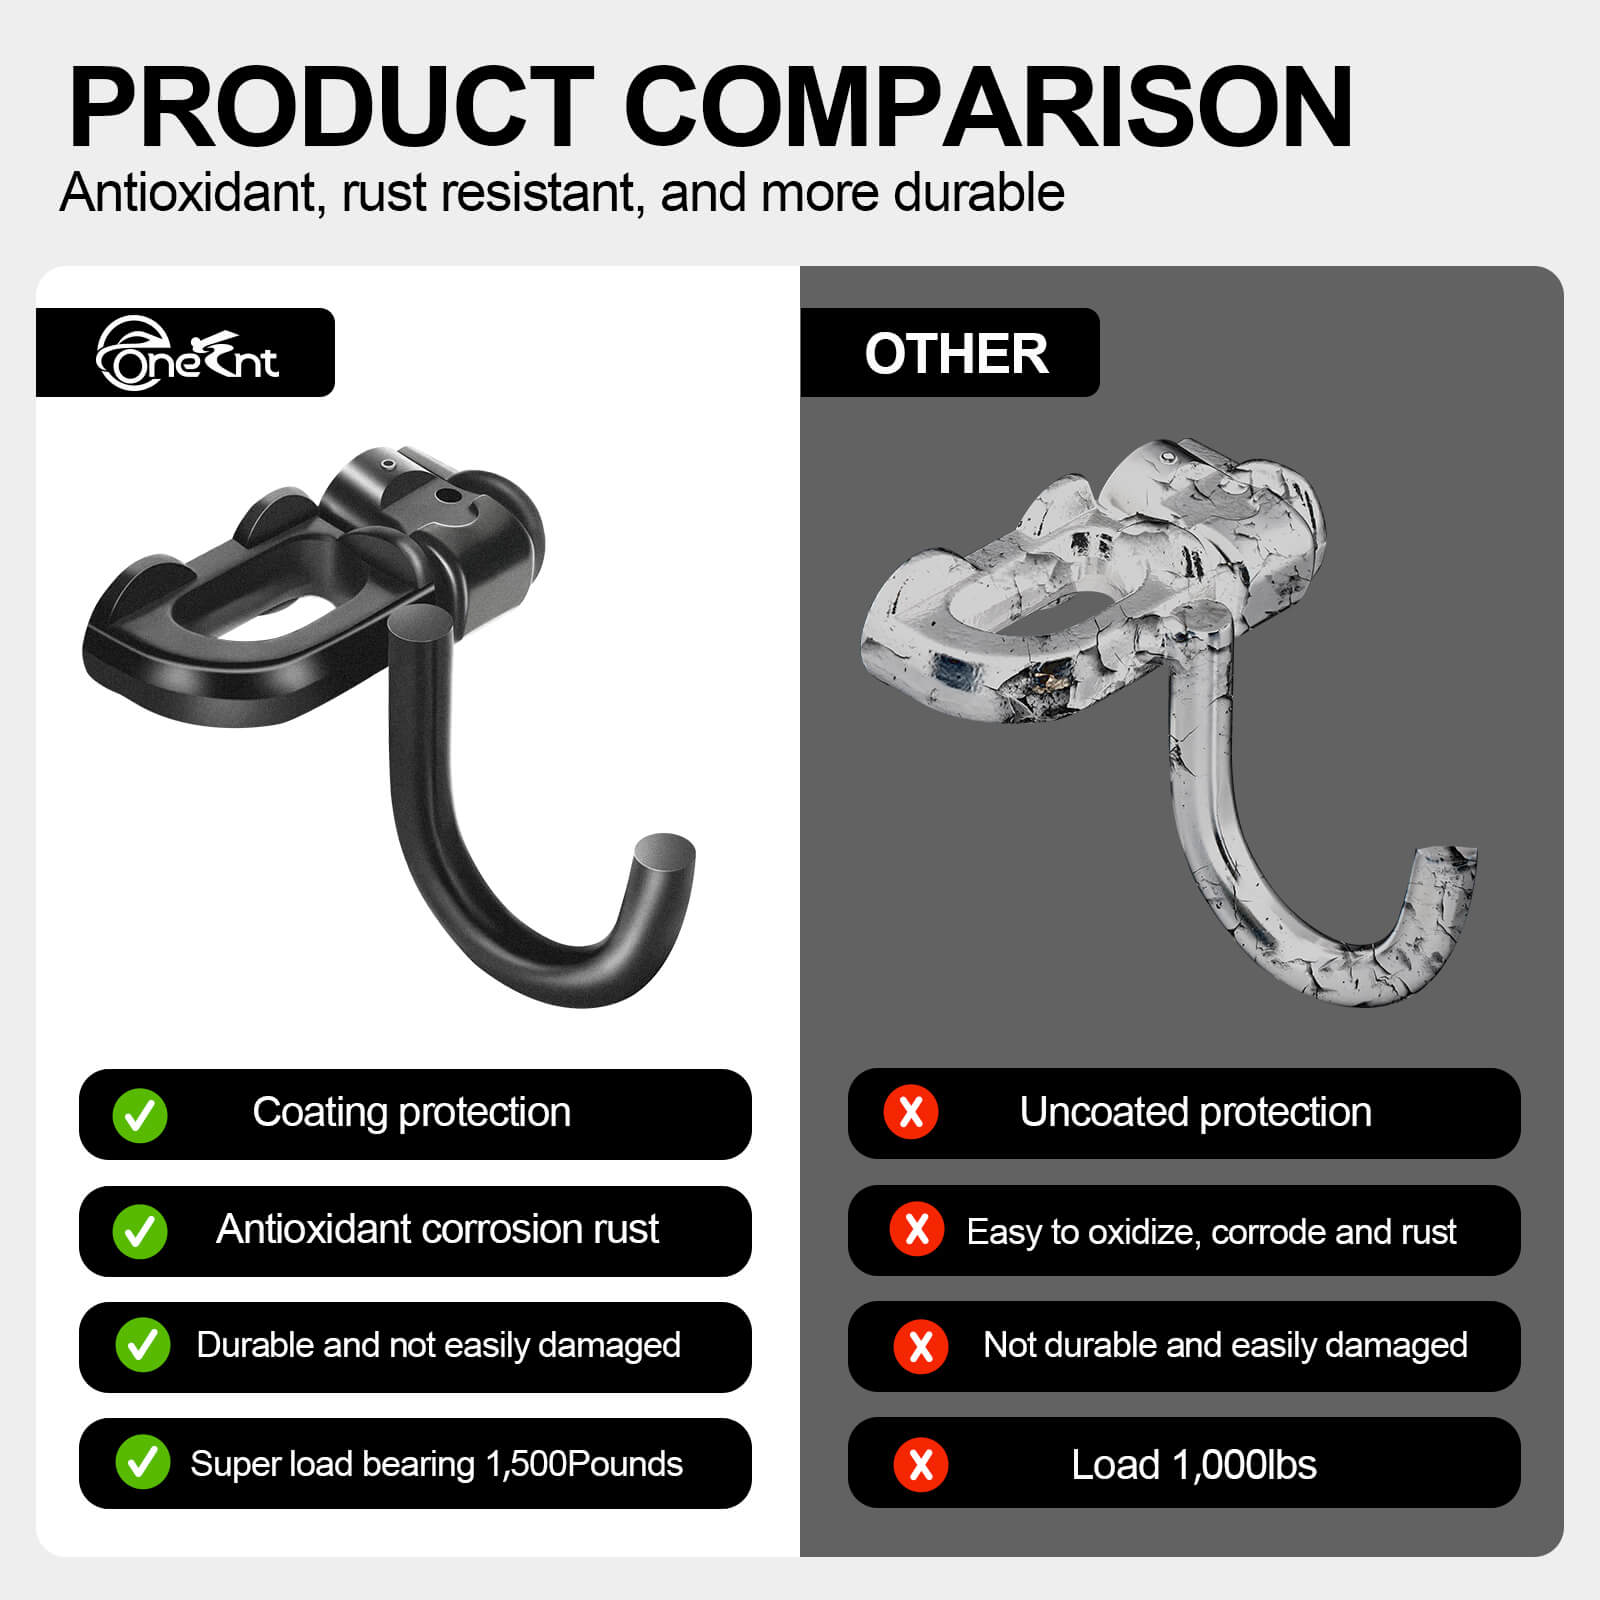 Since DL2's hook is basically mechanically different from DL1's